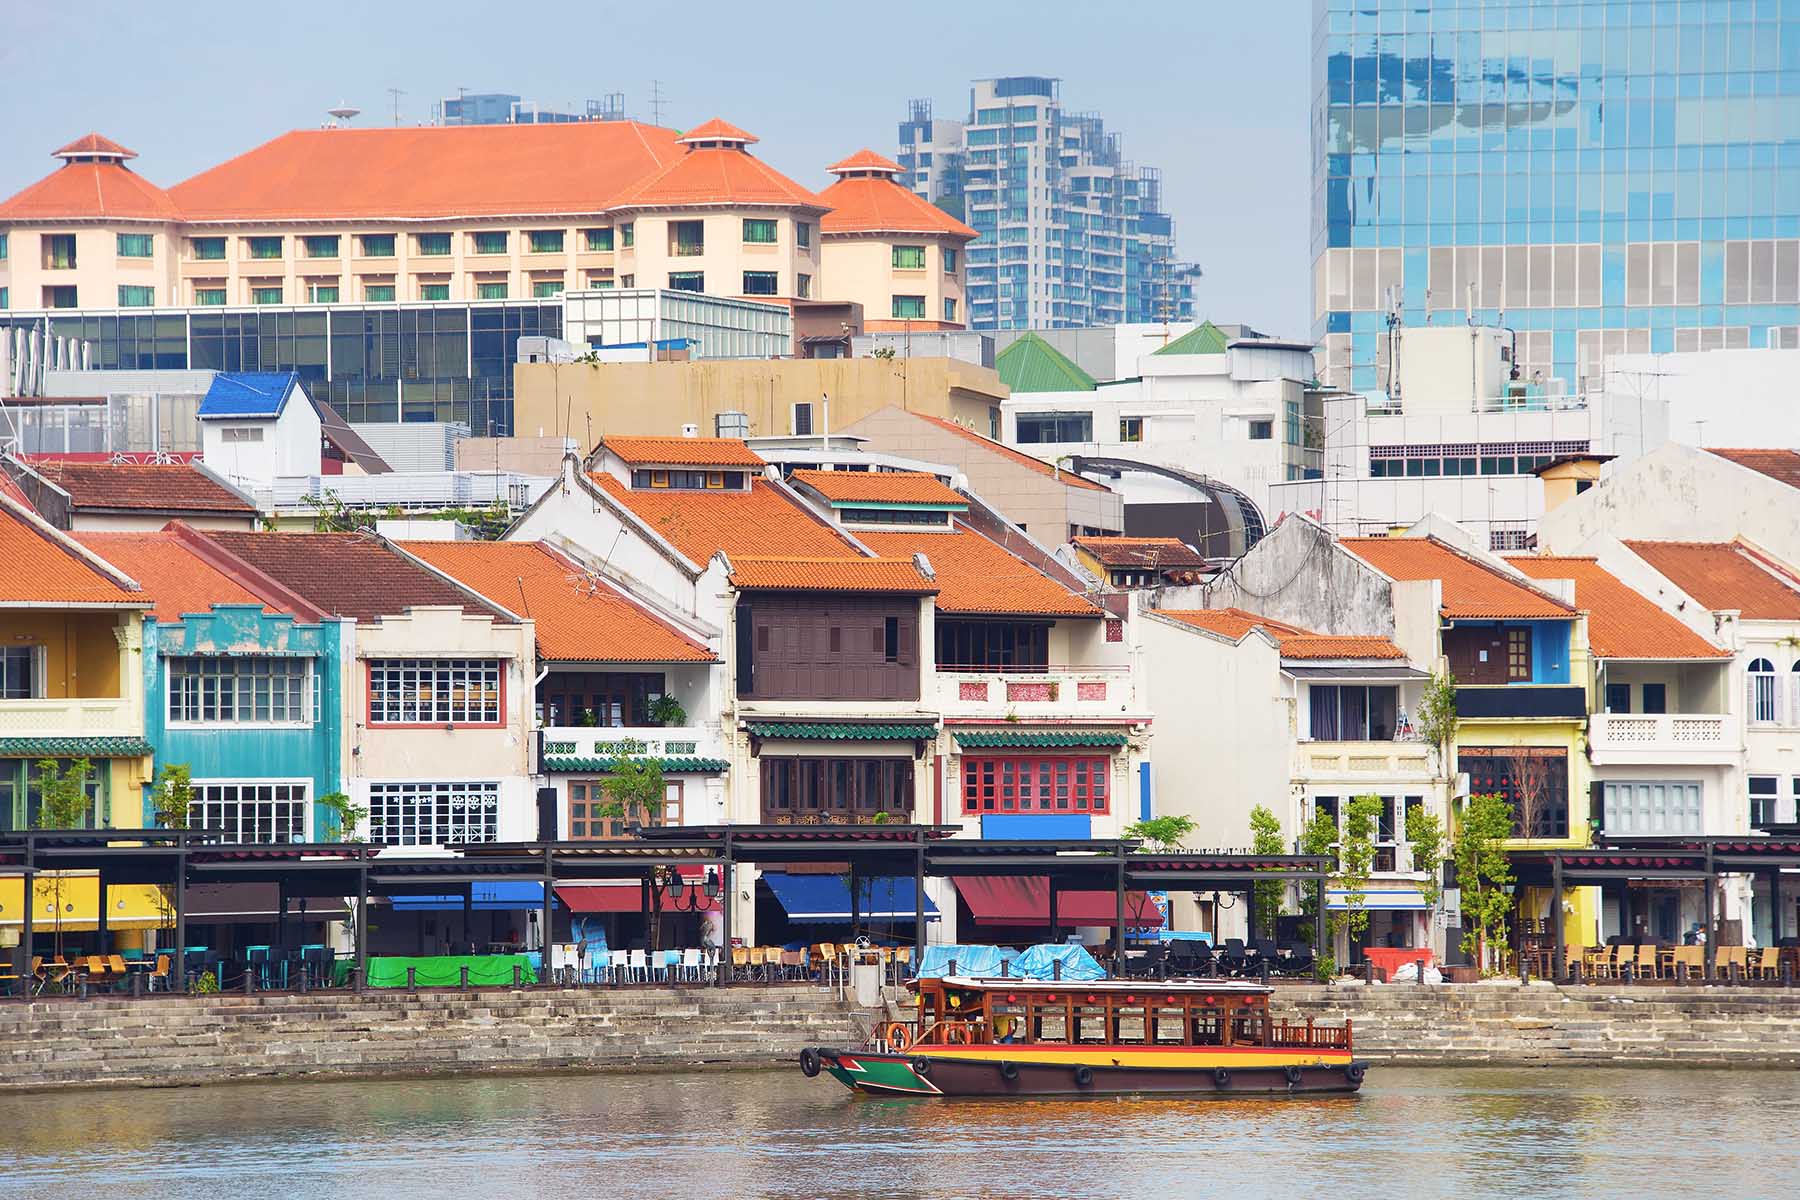 Poorly maintained houses in Boat Quay, the historial part of Singapore. The houses are built near the river and a boat is going by.